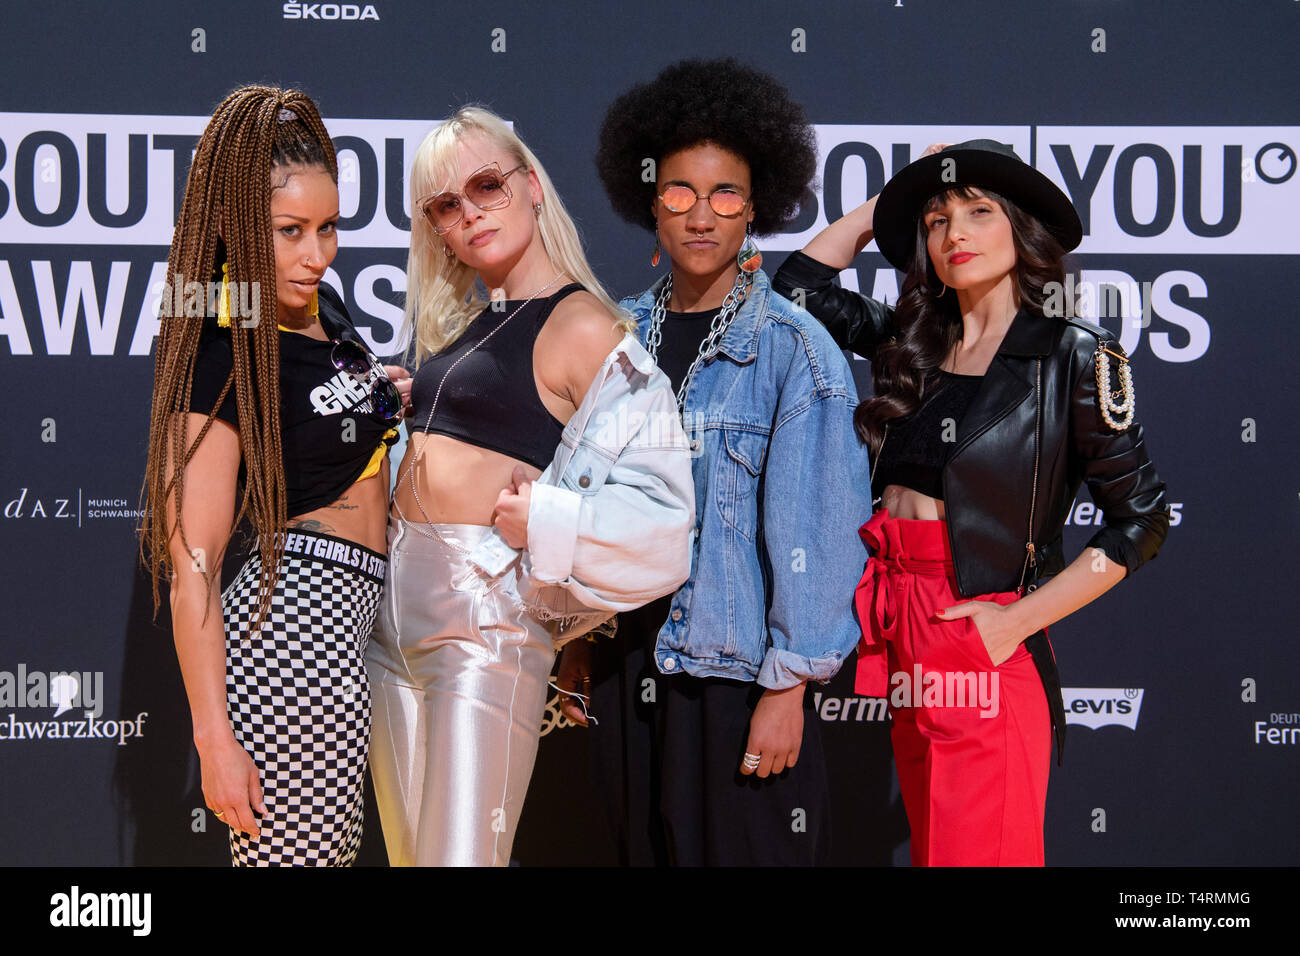 18 April 2019, Bavaria, Grünwald: The band chief boss with Sofie Baila (l-r), dancer Maike Mohr, singer Alice Martin and Andra Kennedy come to the presentation of the 'About you' awards to the social media personalities of the year in the Bavaria film city. Photo: Matthias Balk/dpa Stock Photo